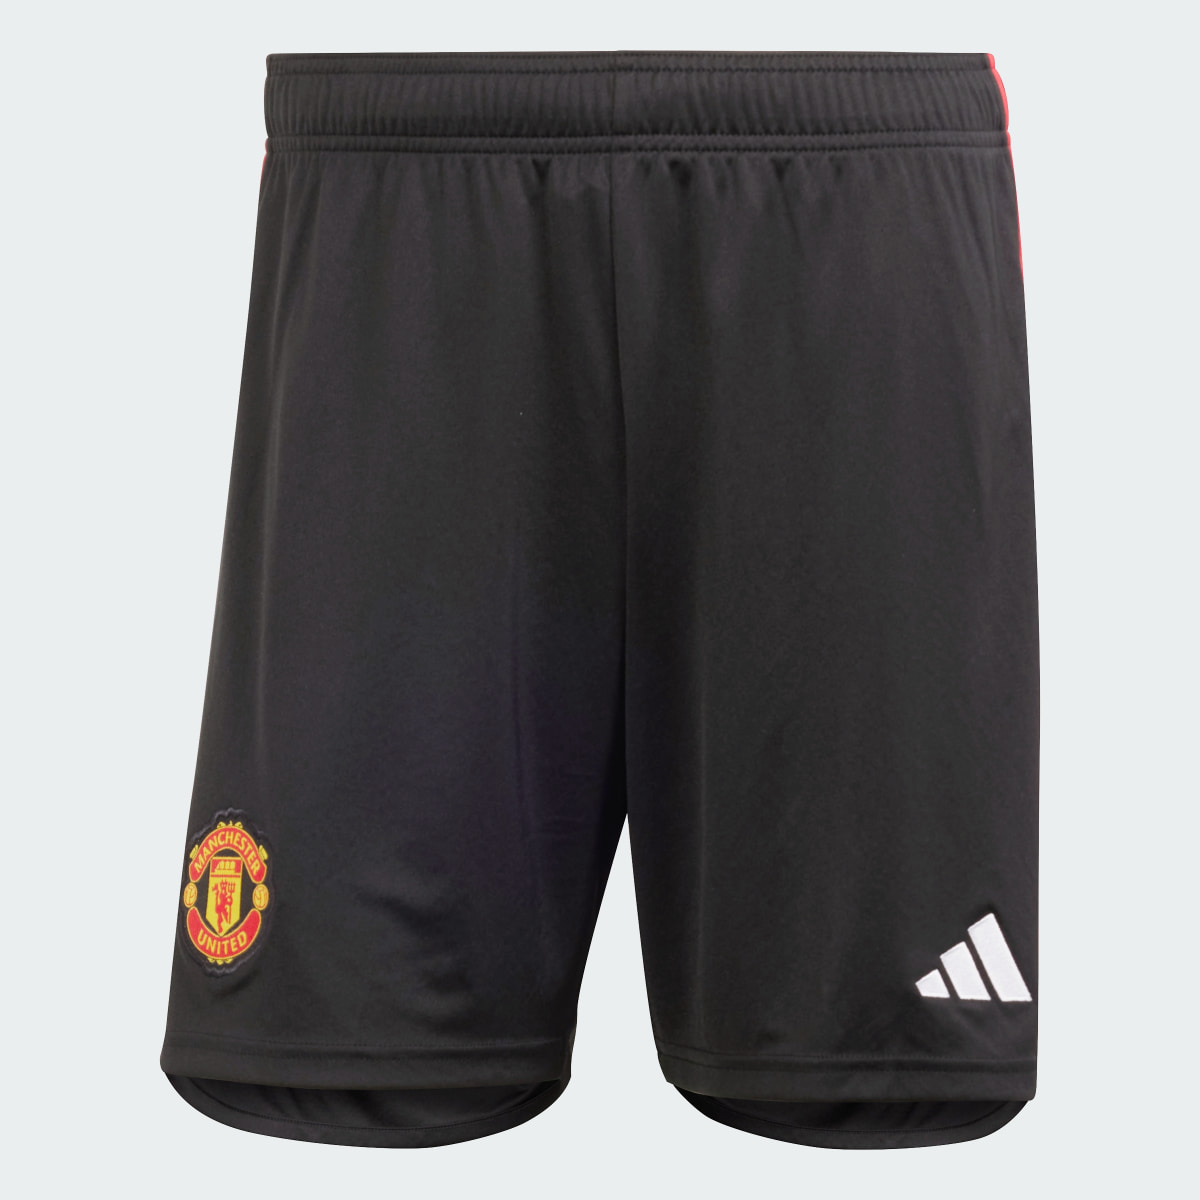 Adidas Short Home 23/24 Manchester United FC. 4